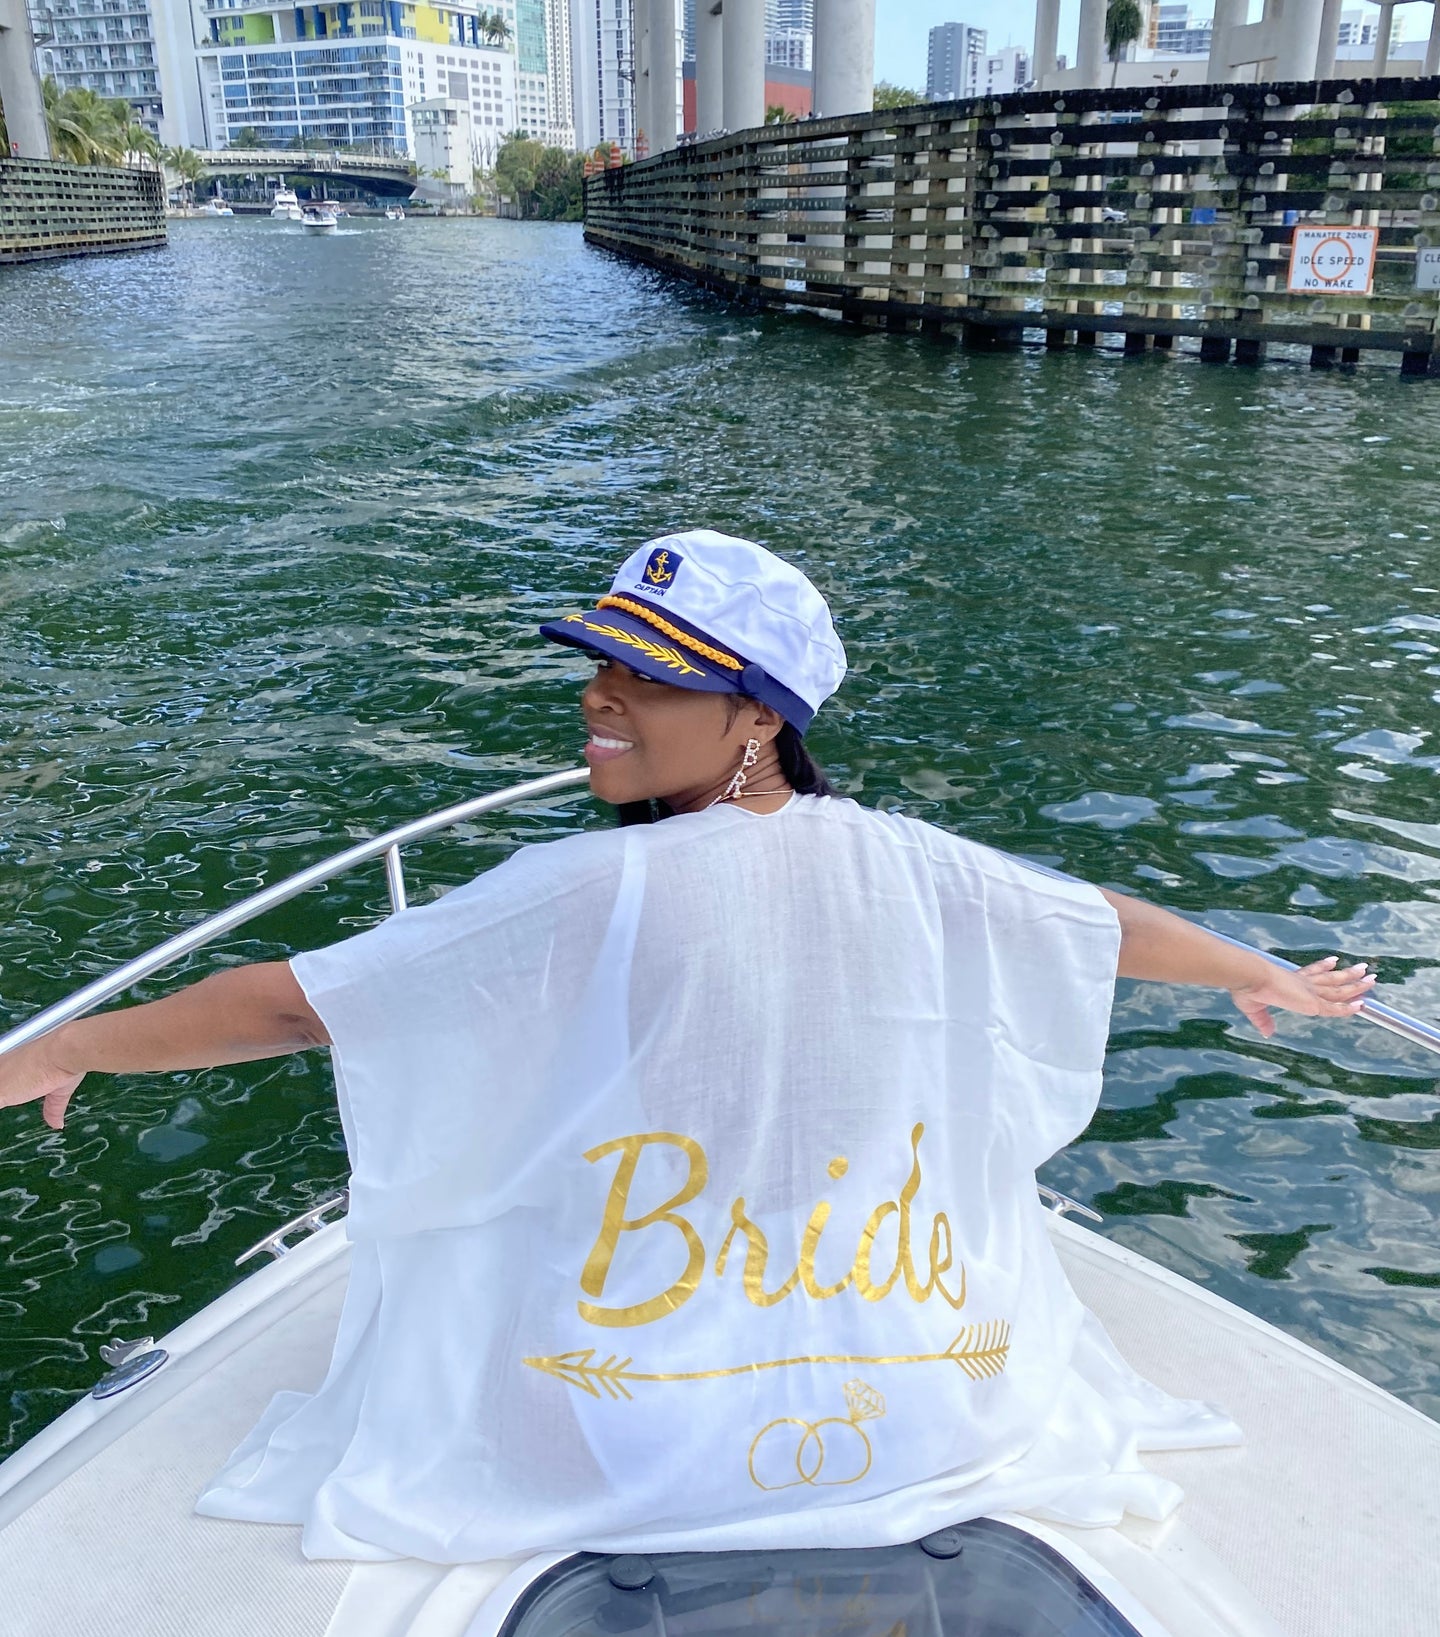 BRIDE Cover-Up cardigan for bachelorette parties